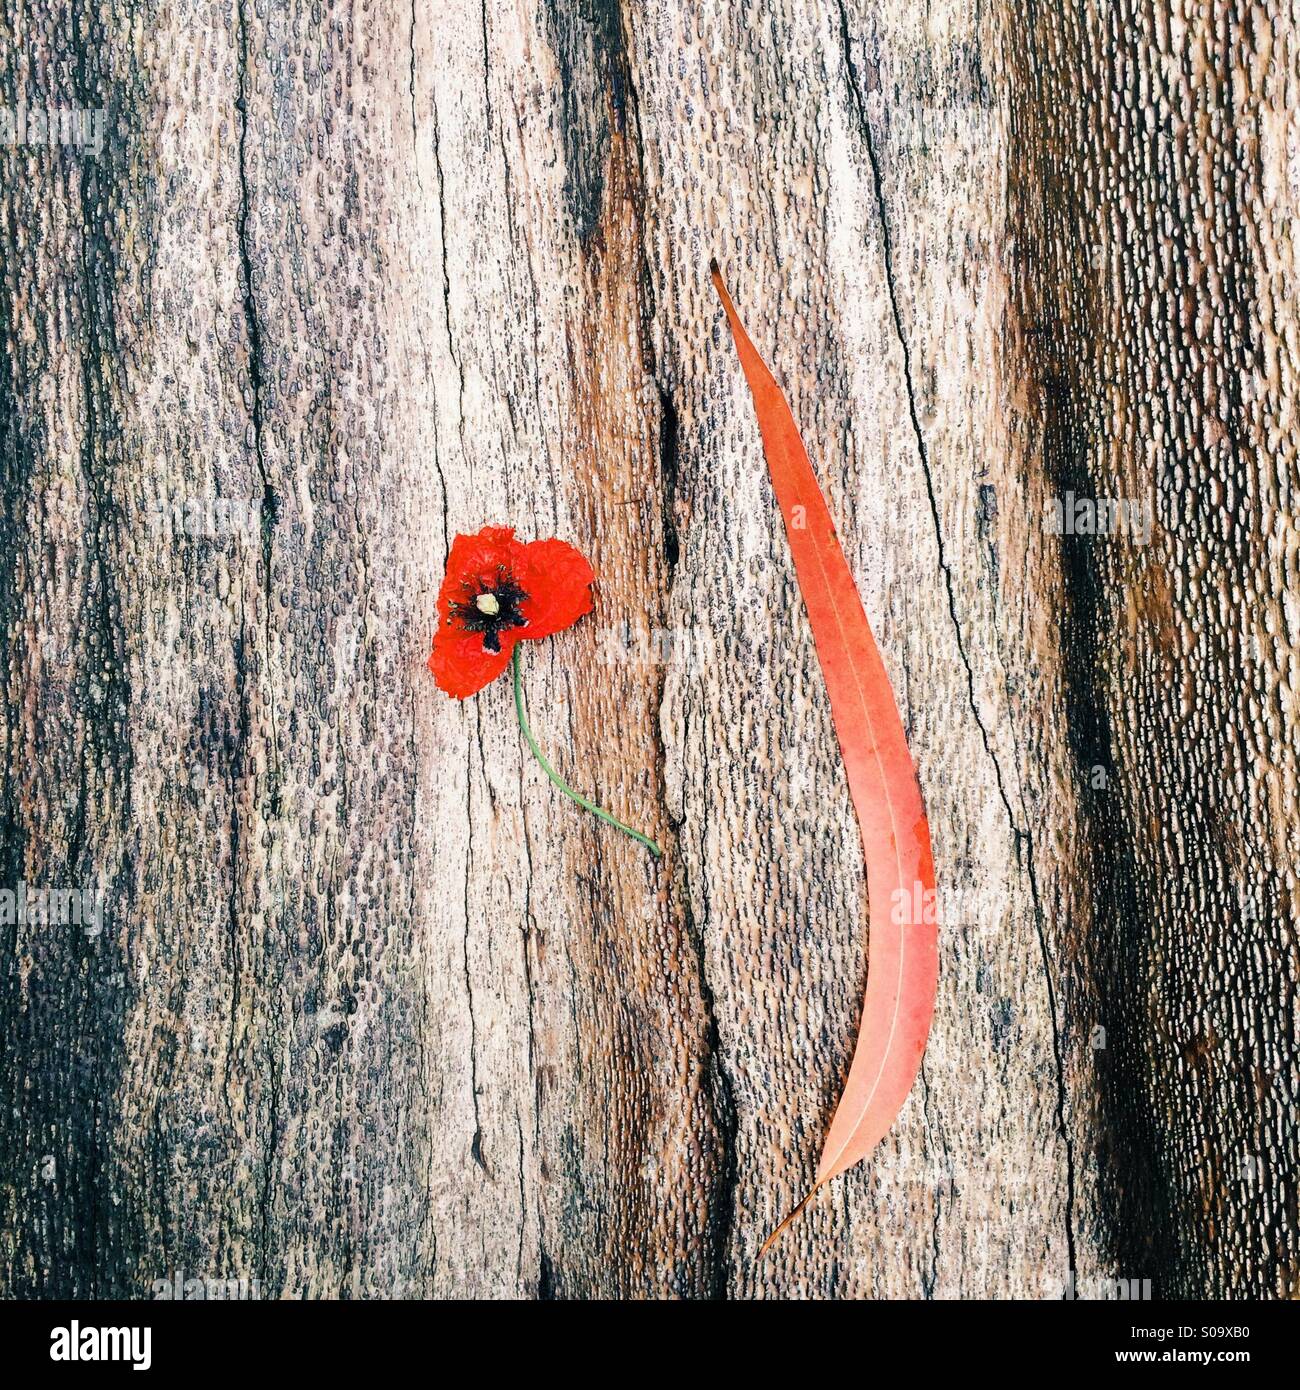 Poppy & and red leaf on fallen tree in autumn Stock Photo